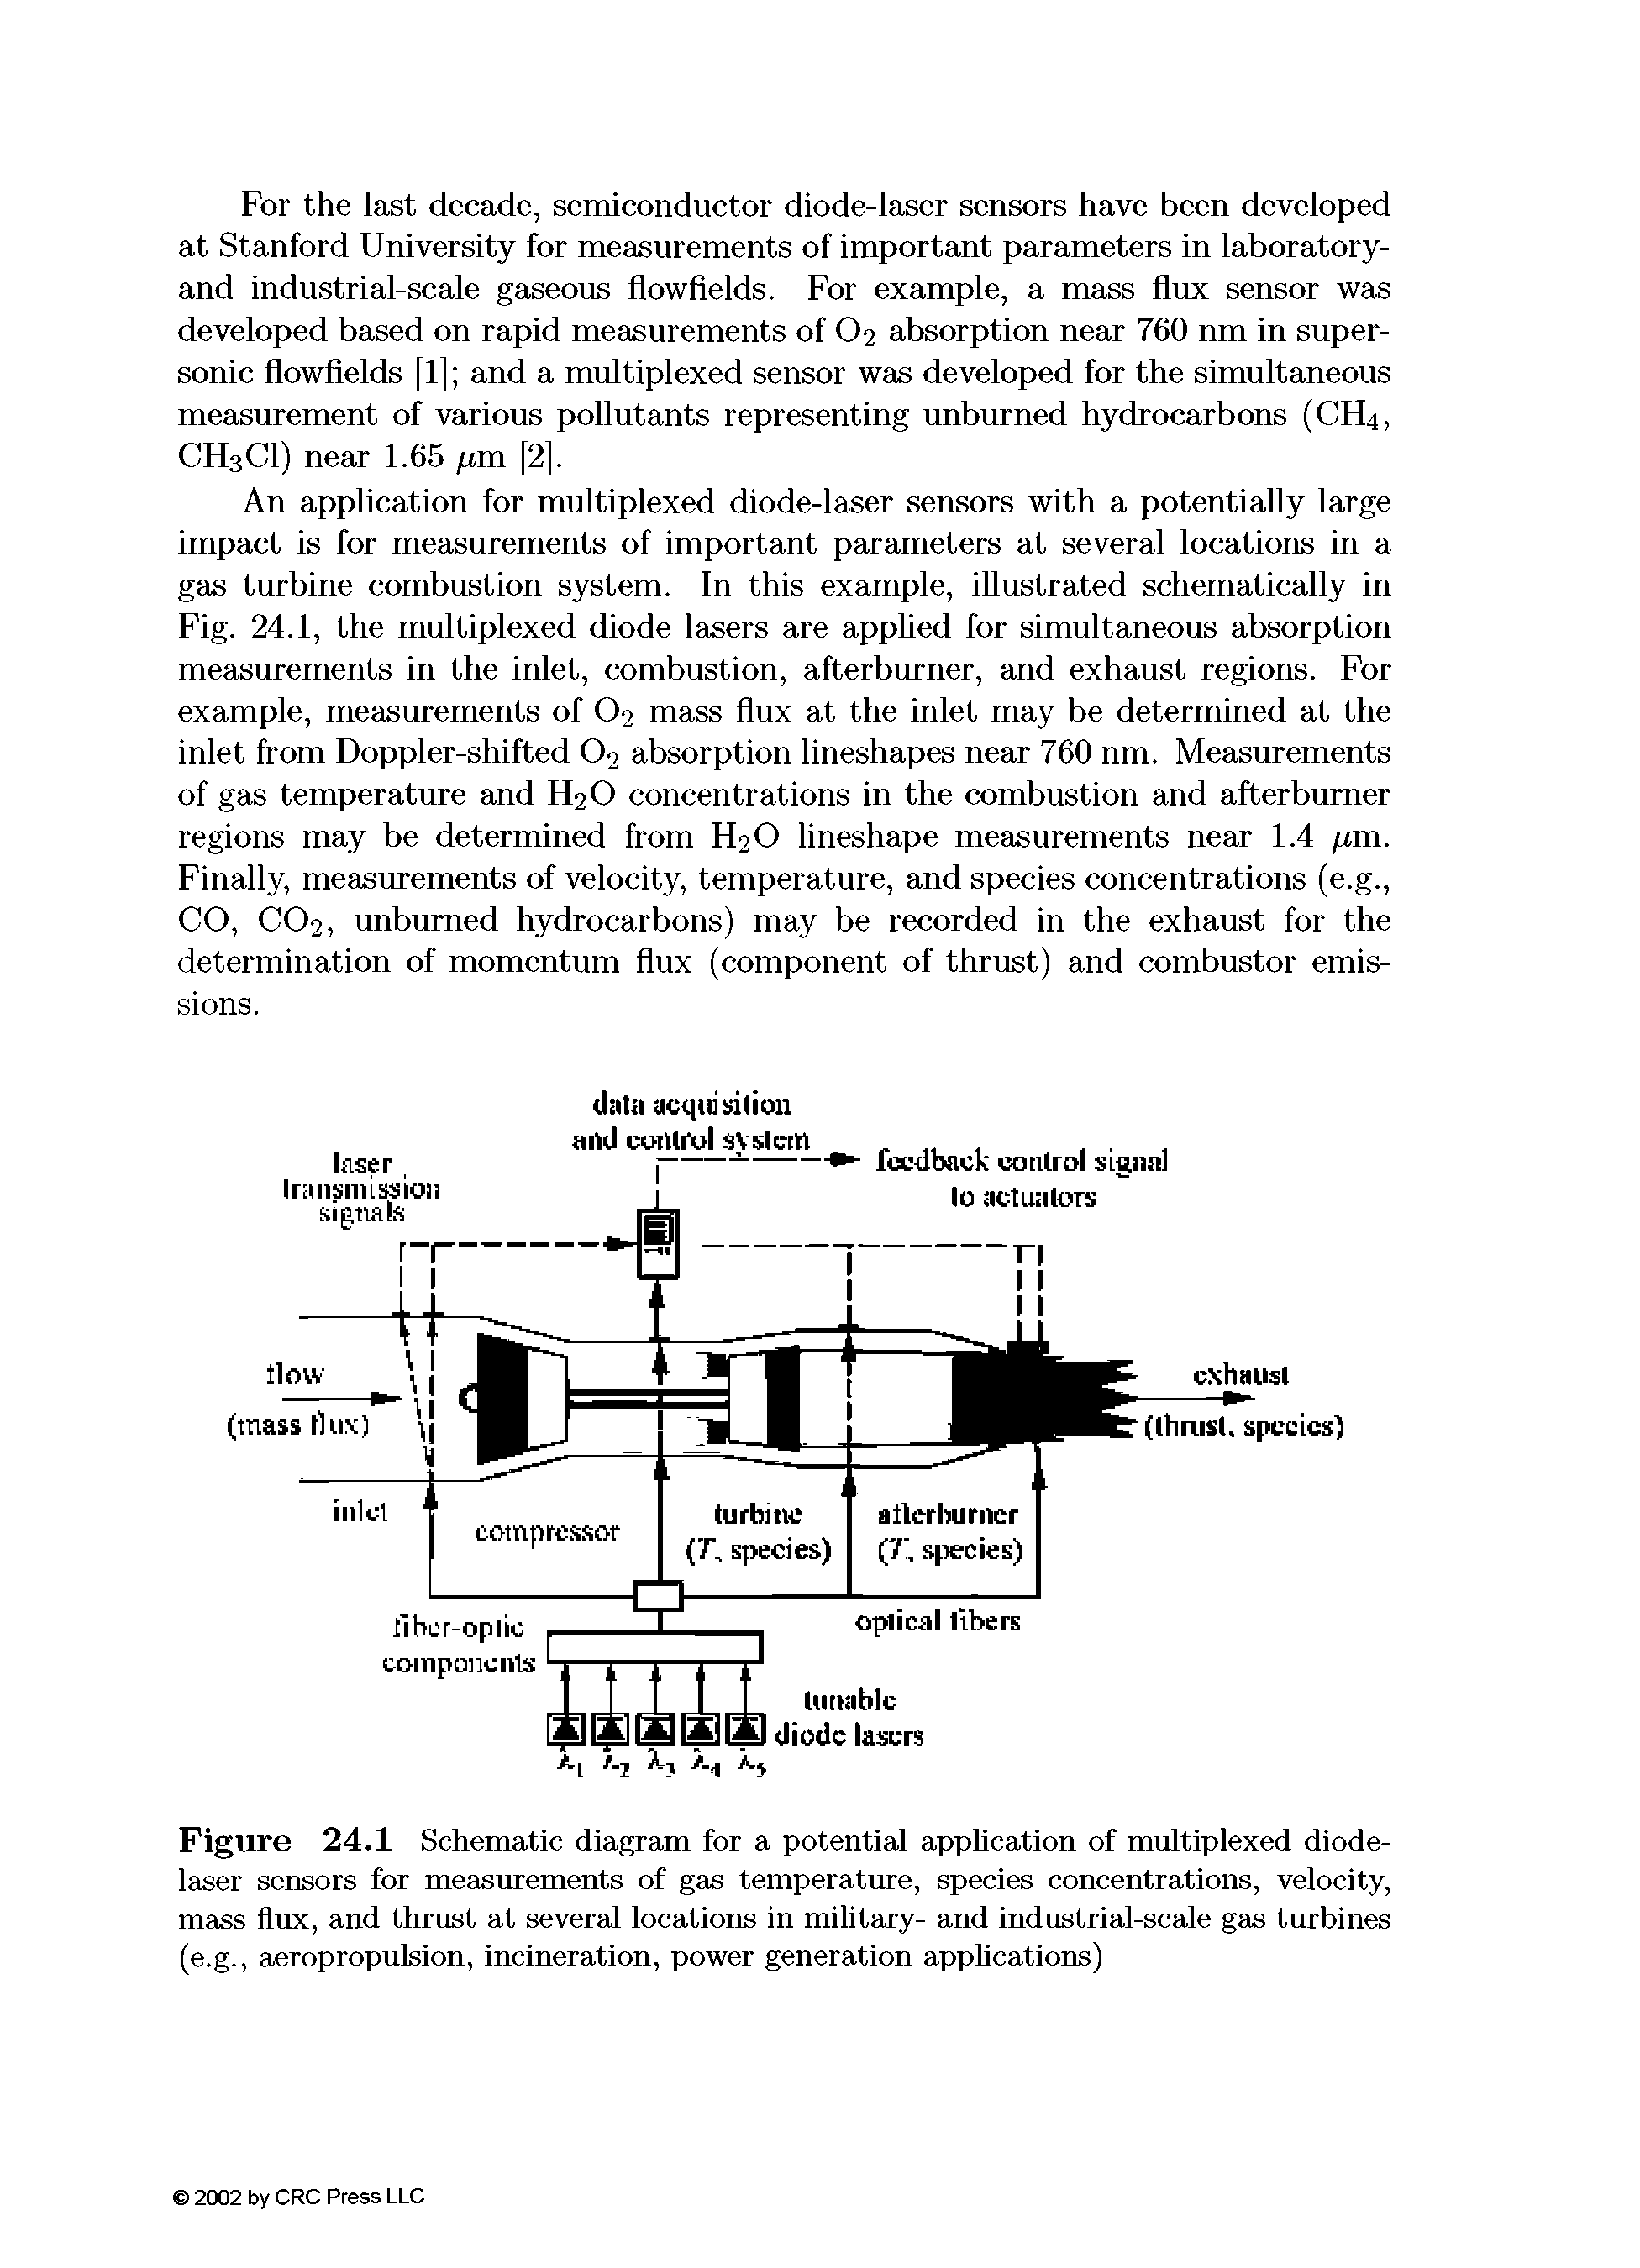 Figure 24.1 Schematic diagram for a potential application of multiplexed diode-laser sensors for measurements of gas temperature, species concentrations, velocity, mass flux, and thrust at several locations in military- and industrial-scale gas turbines (e.g., aeropropulsion, incineration, power generation applications)...